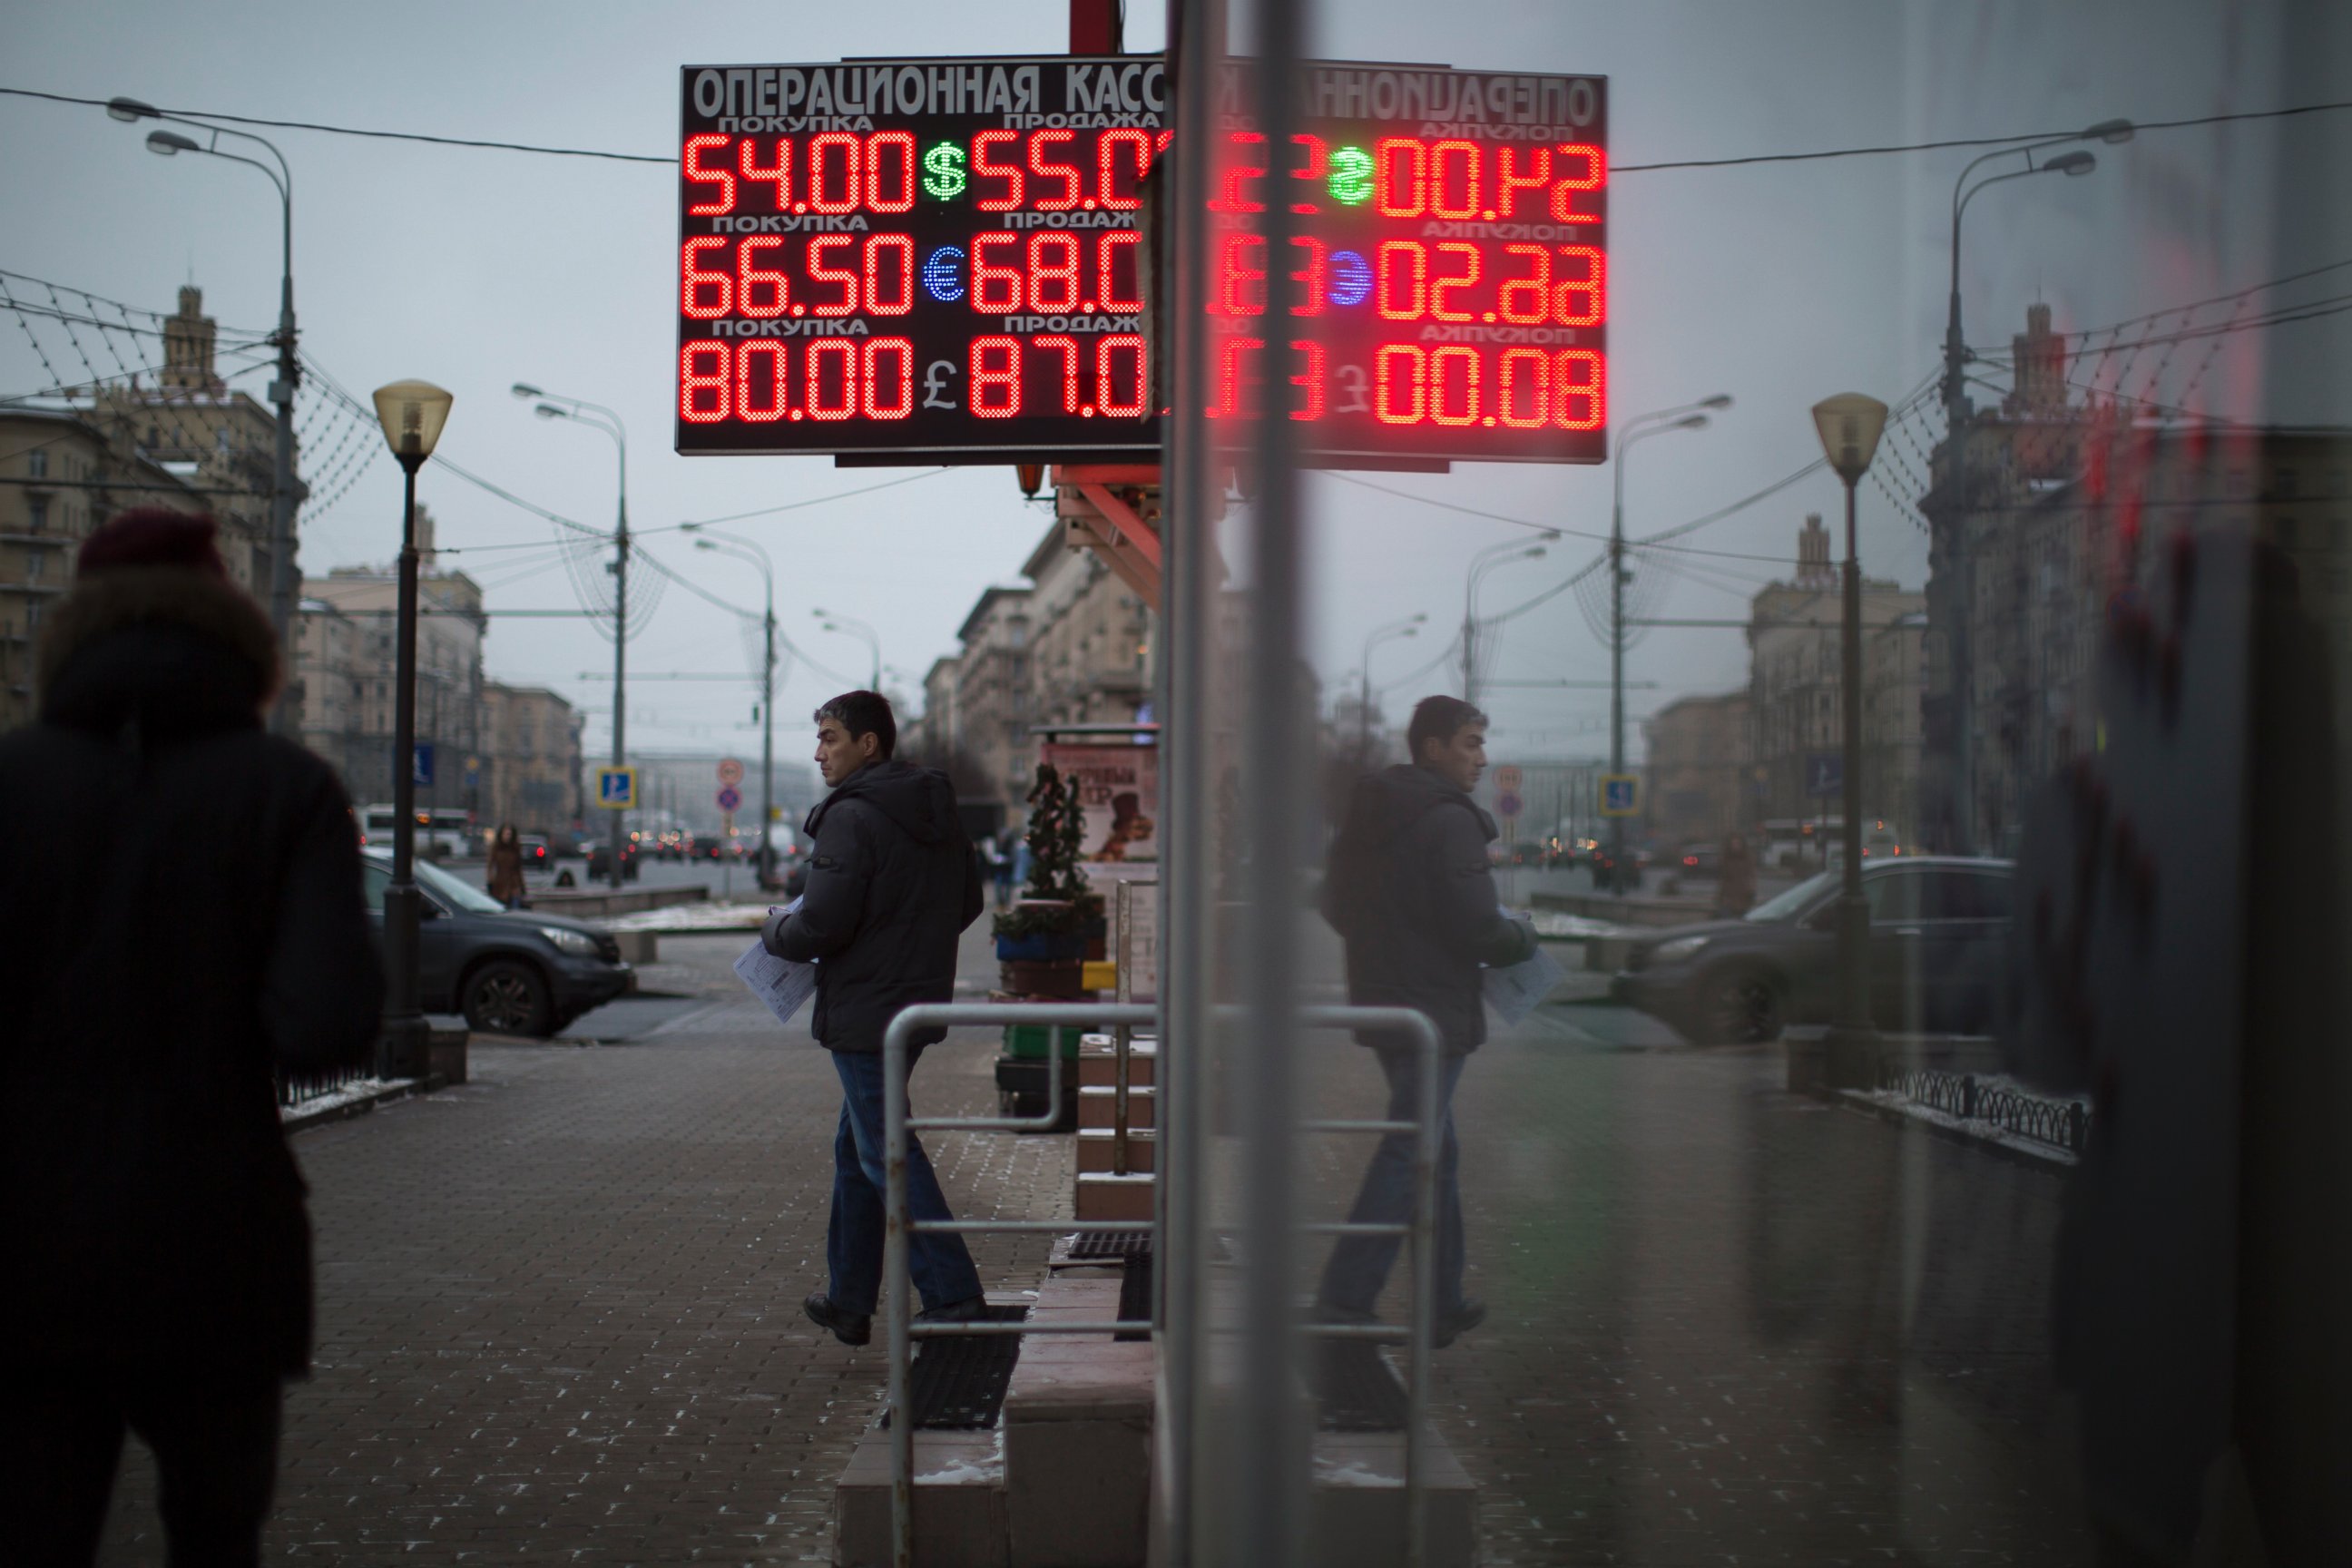 PHOTO: People walk past a display with currency exchange rates in Moscow, Dec. 9, 2014.